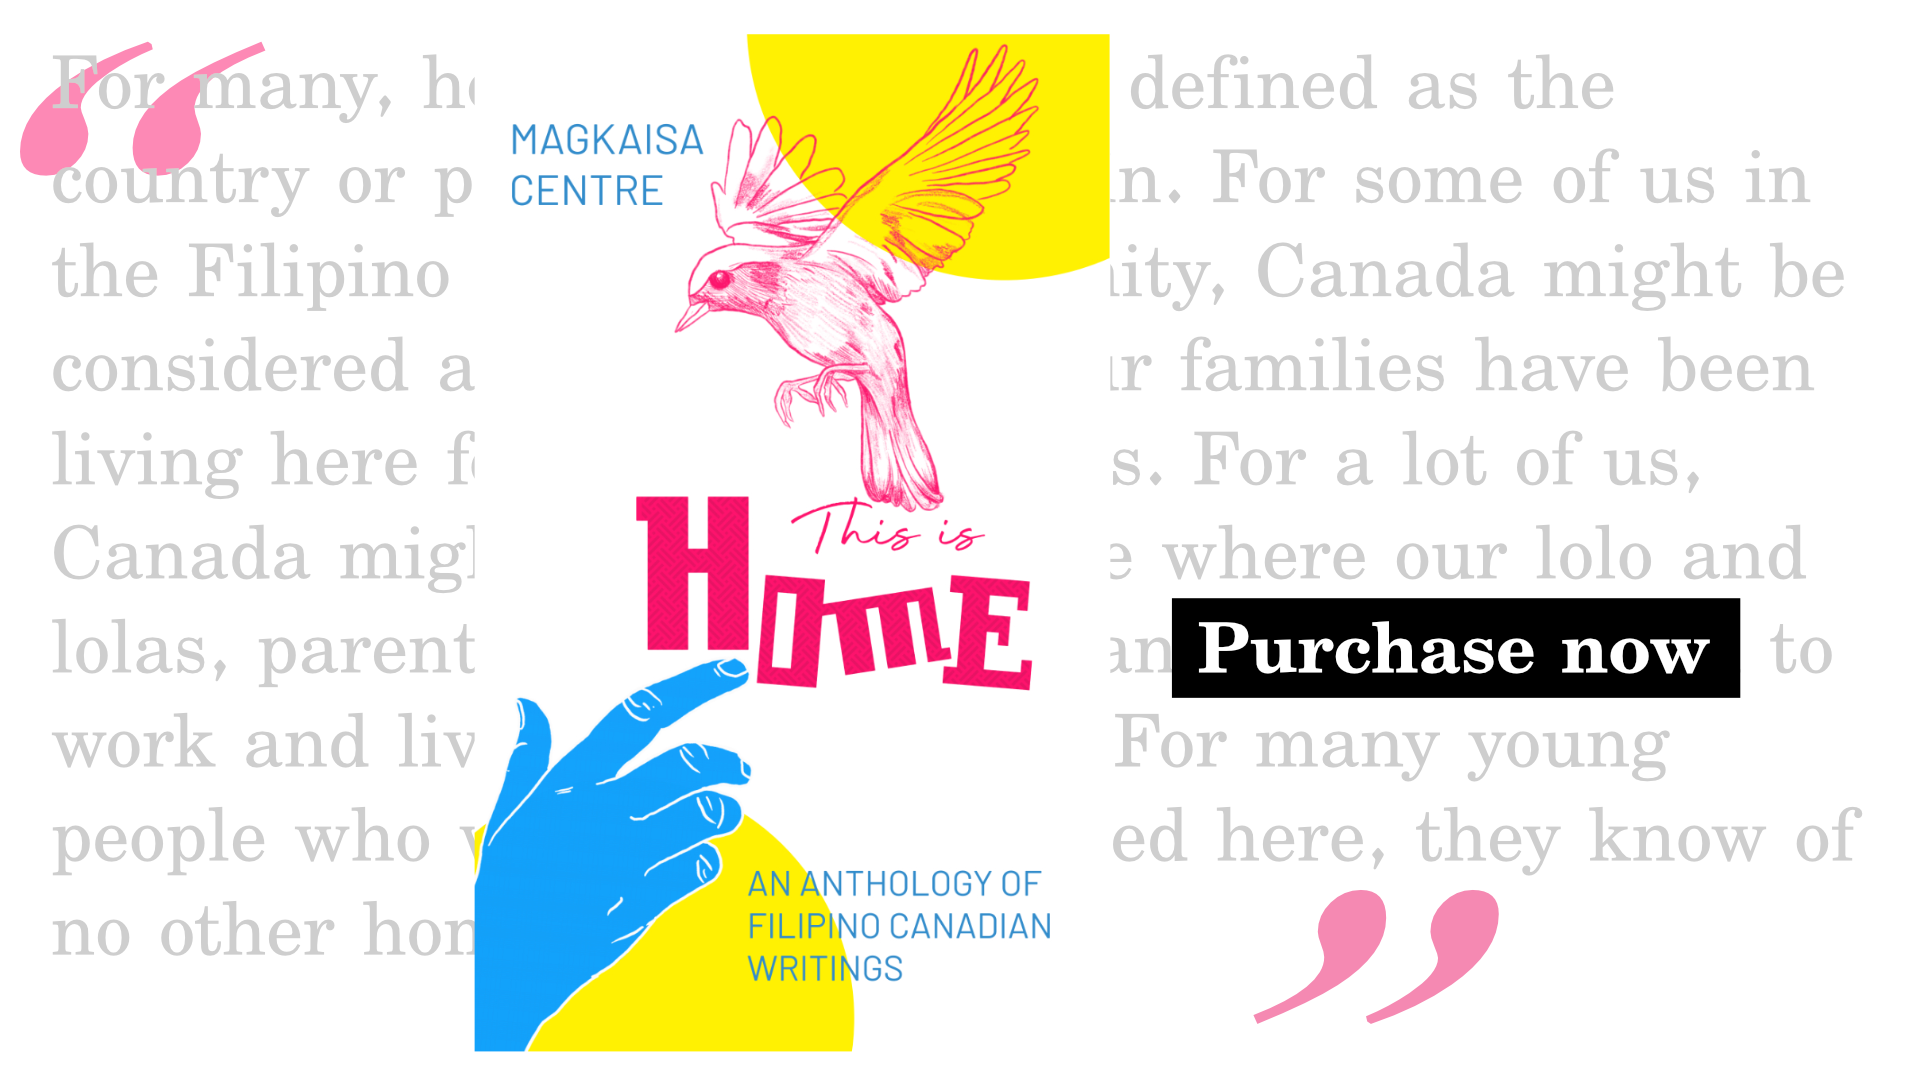 Graphic image of the book: "This is Home: An anthology of Filipino Canadian writings" with "purchase now" link